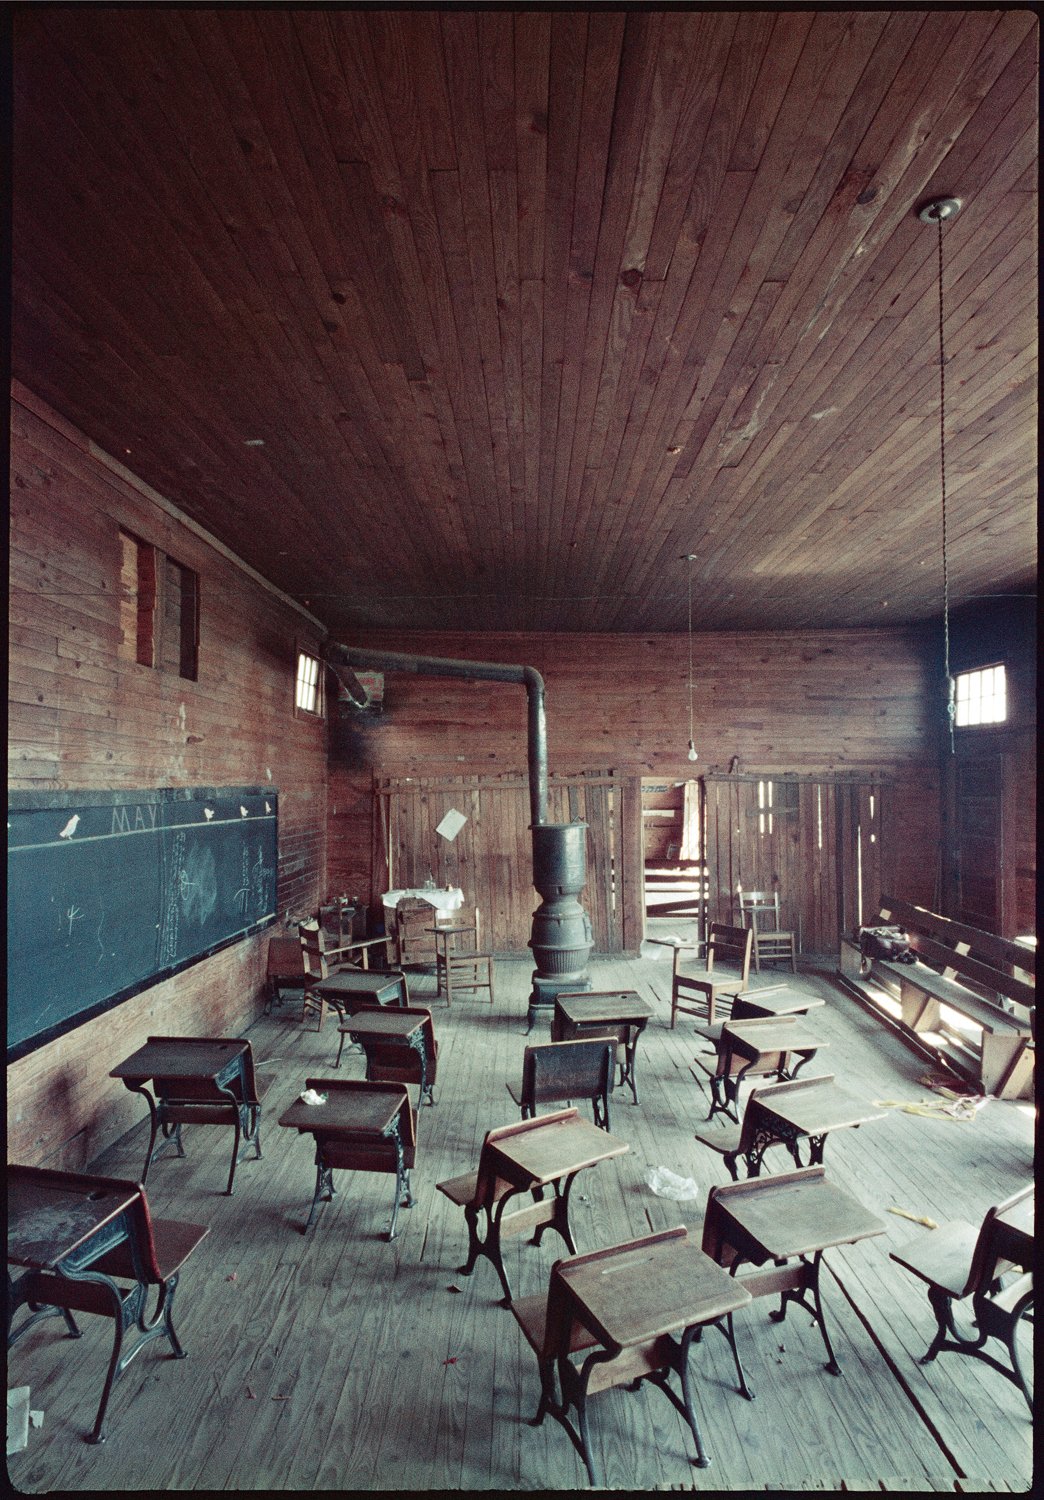  Gordon Parks  Black Classroom, Shady Grove, Alabama , 1956 Edition: 10/25 Archival pigment print  15 3⁄4 x 11 in. (image size)  The Do Good Fund, Inc., 2015-012 Photograph by Gordon Parks Courtesy of and copyright The Gordon Parks Foundation 